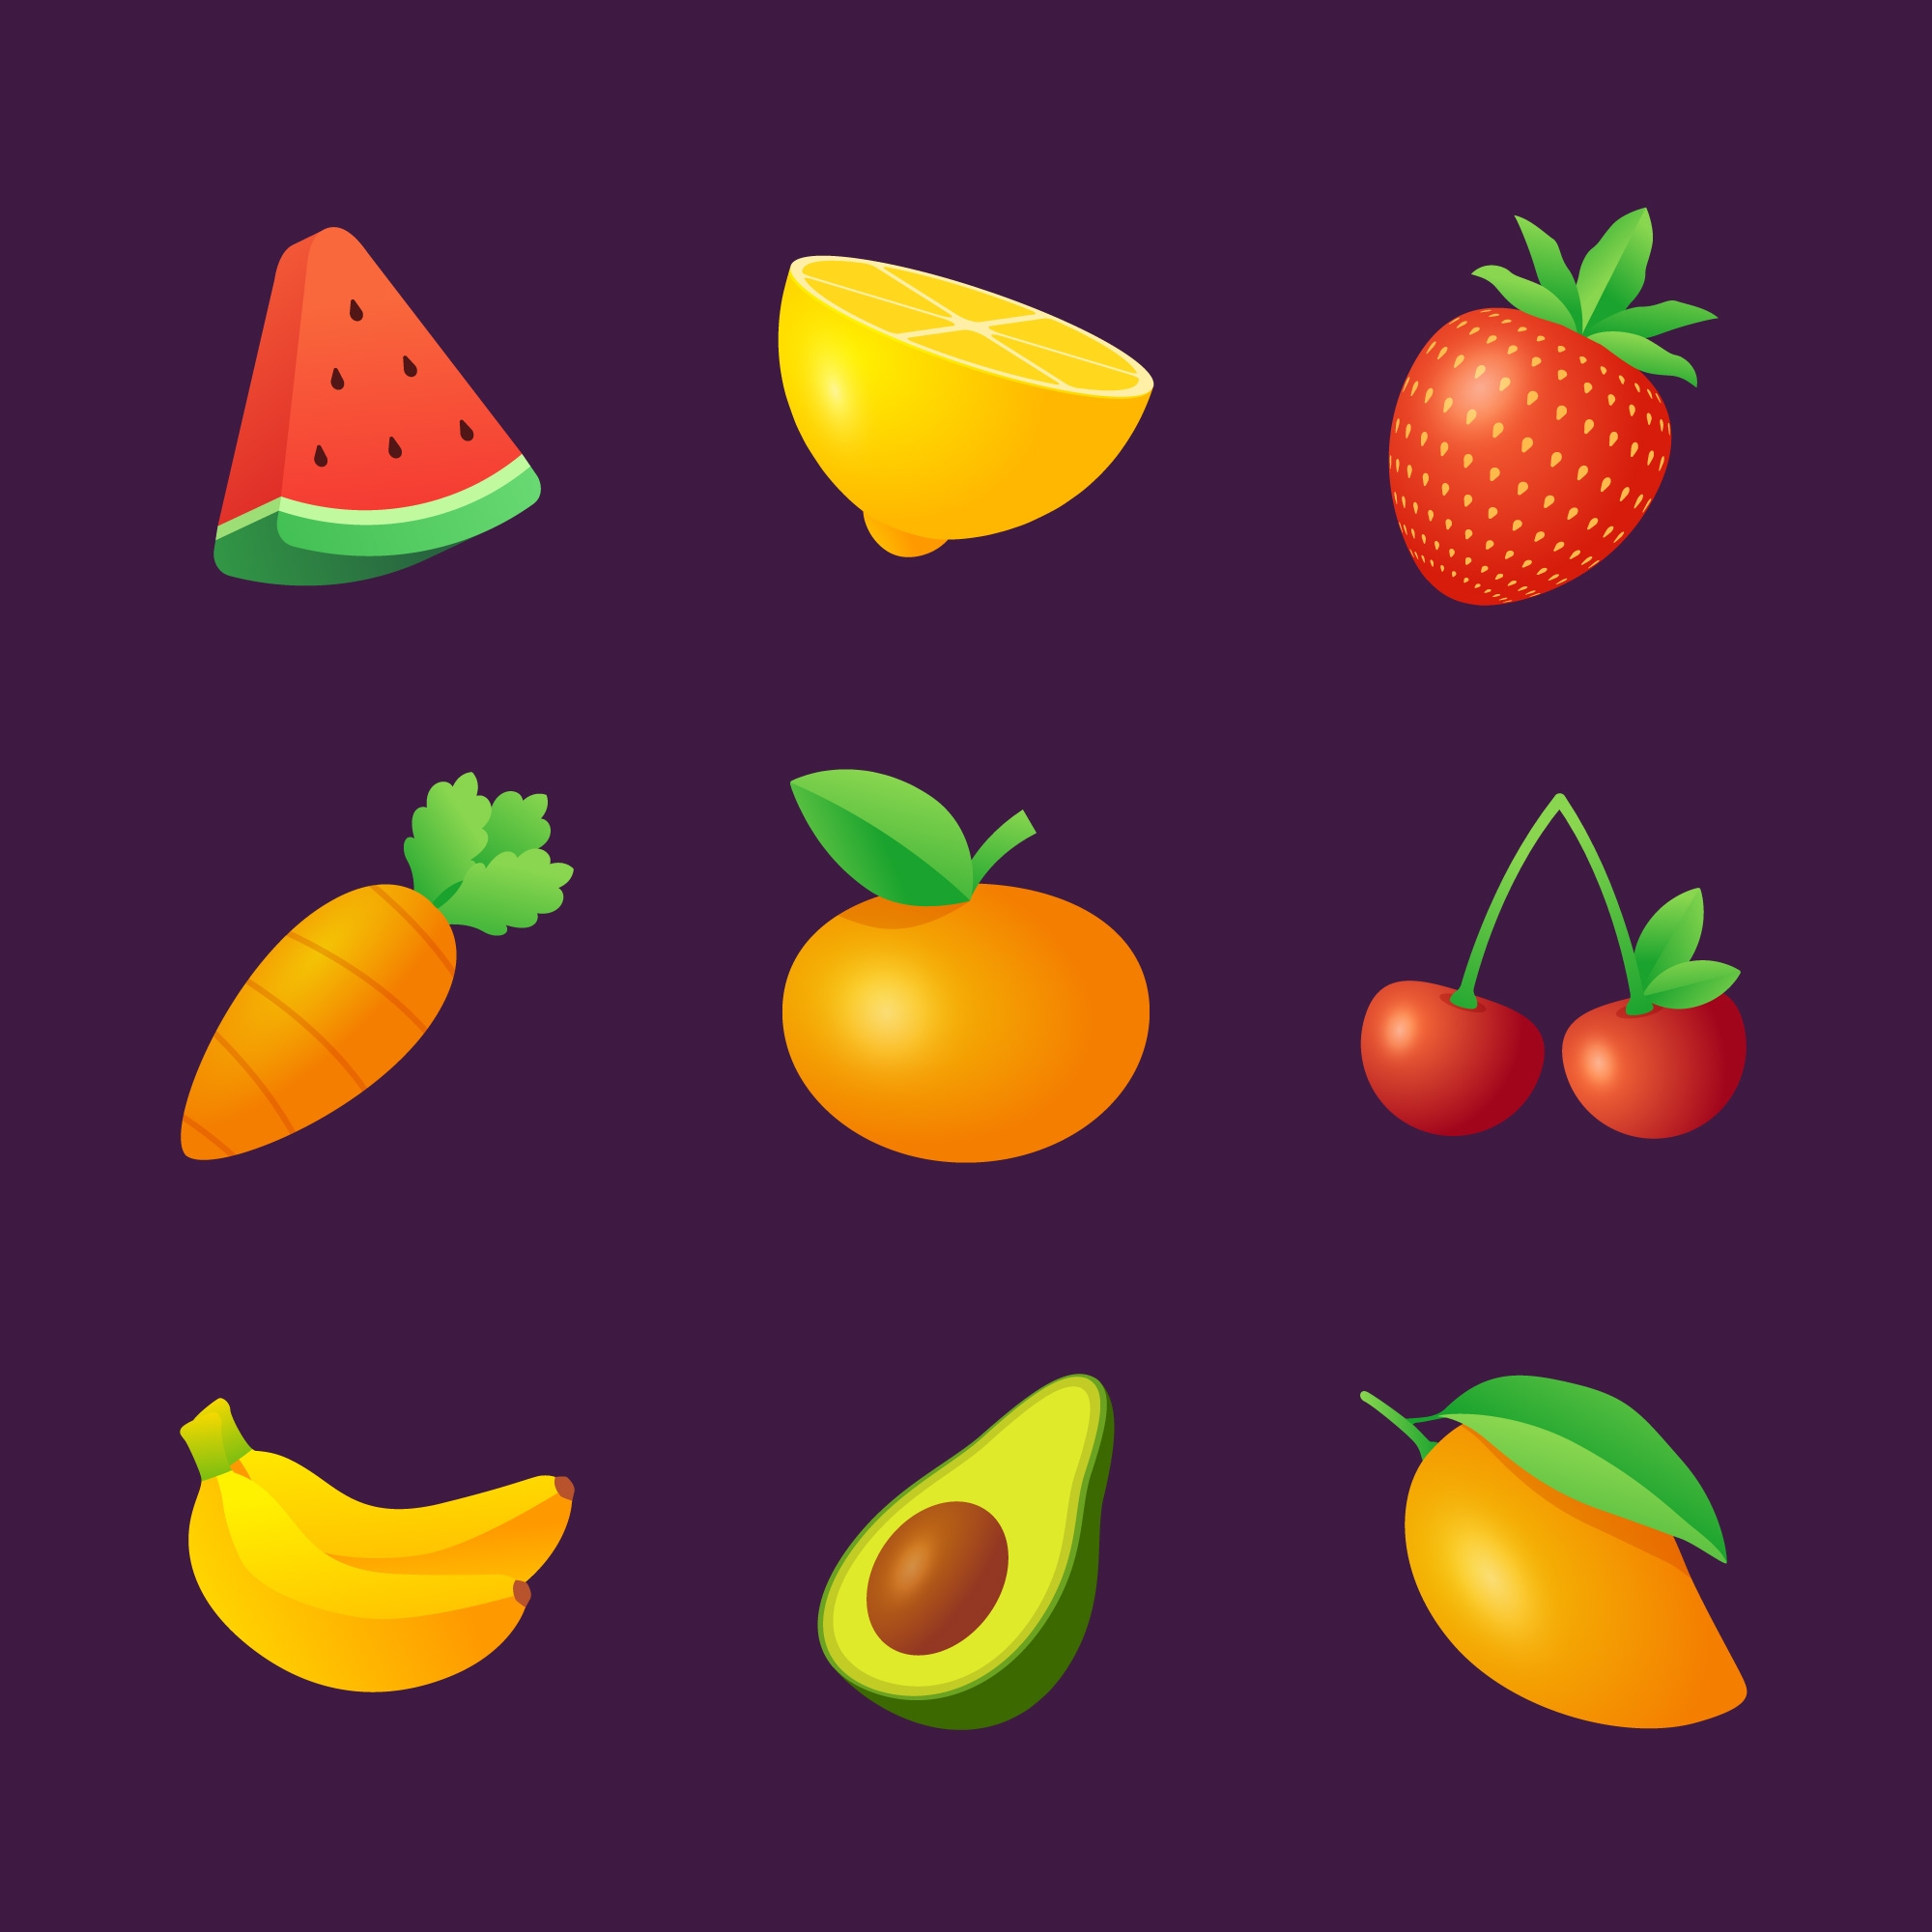 3D Fruit and Vegetables Icons